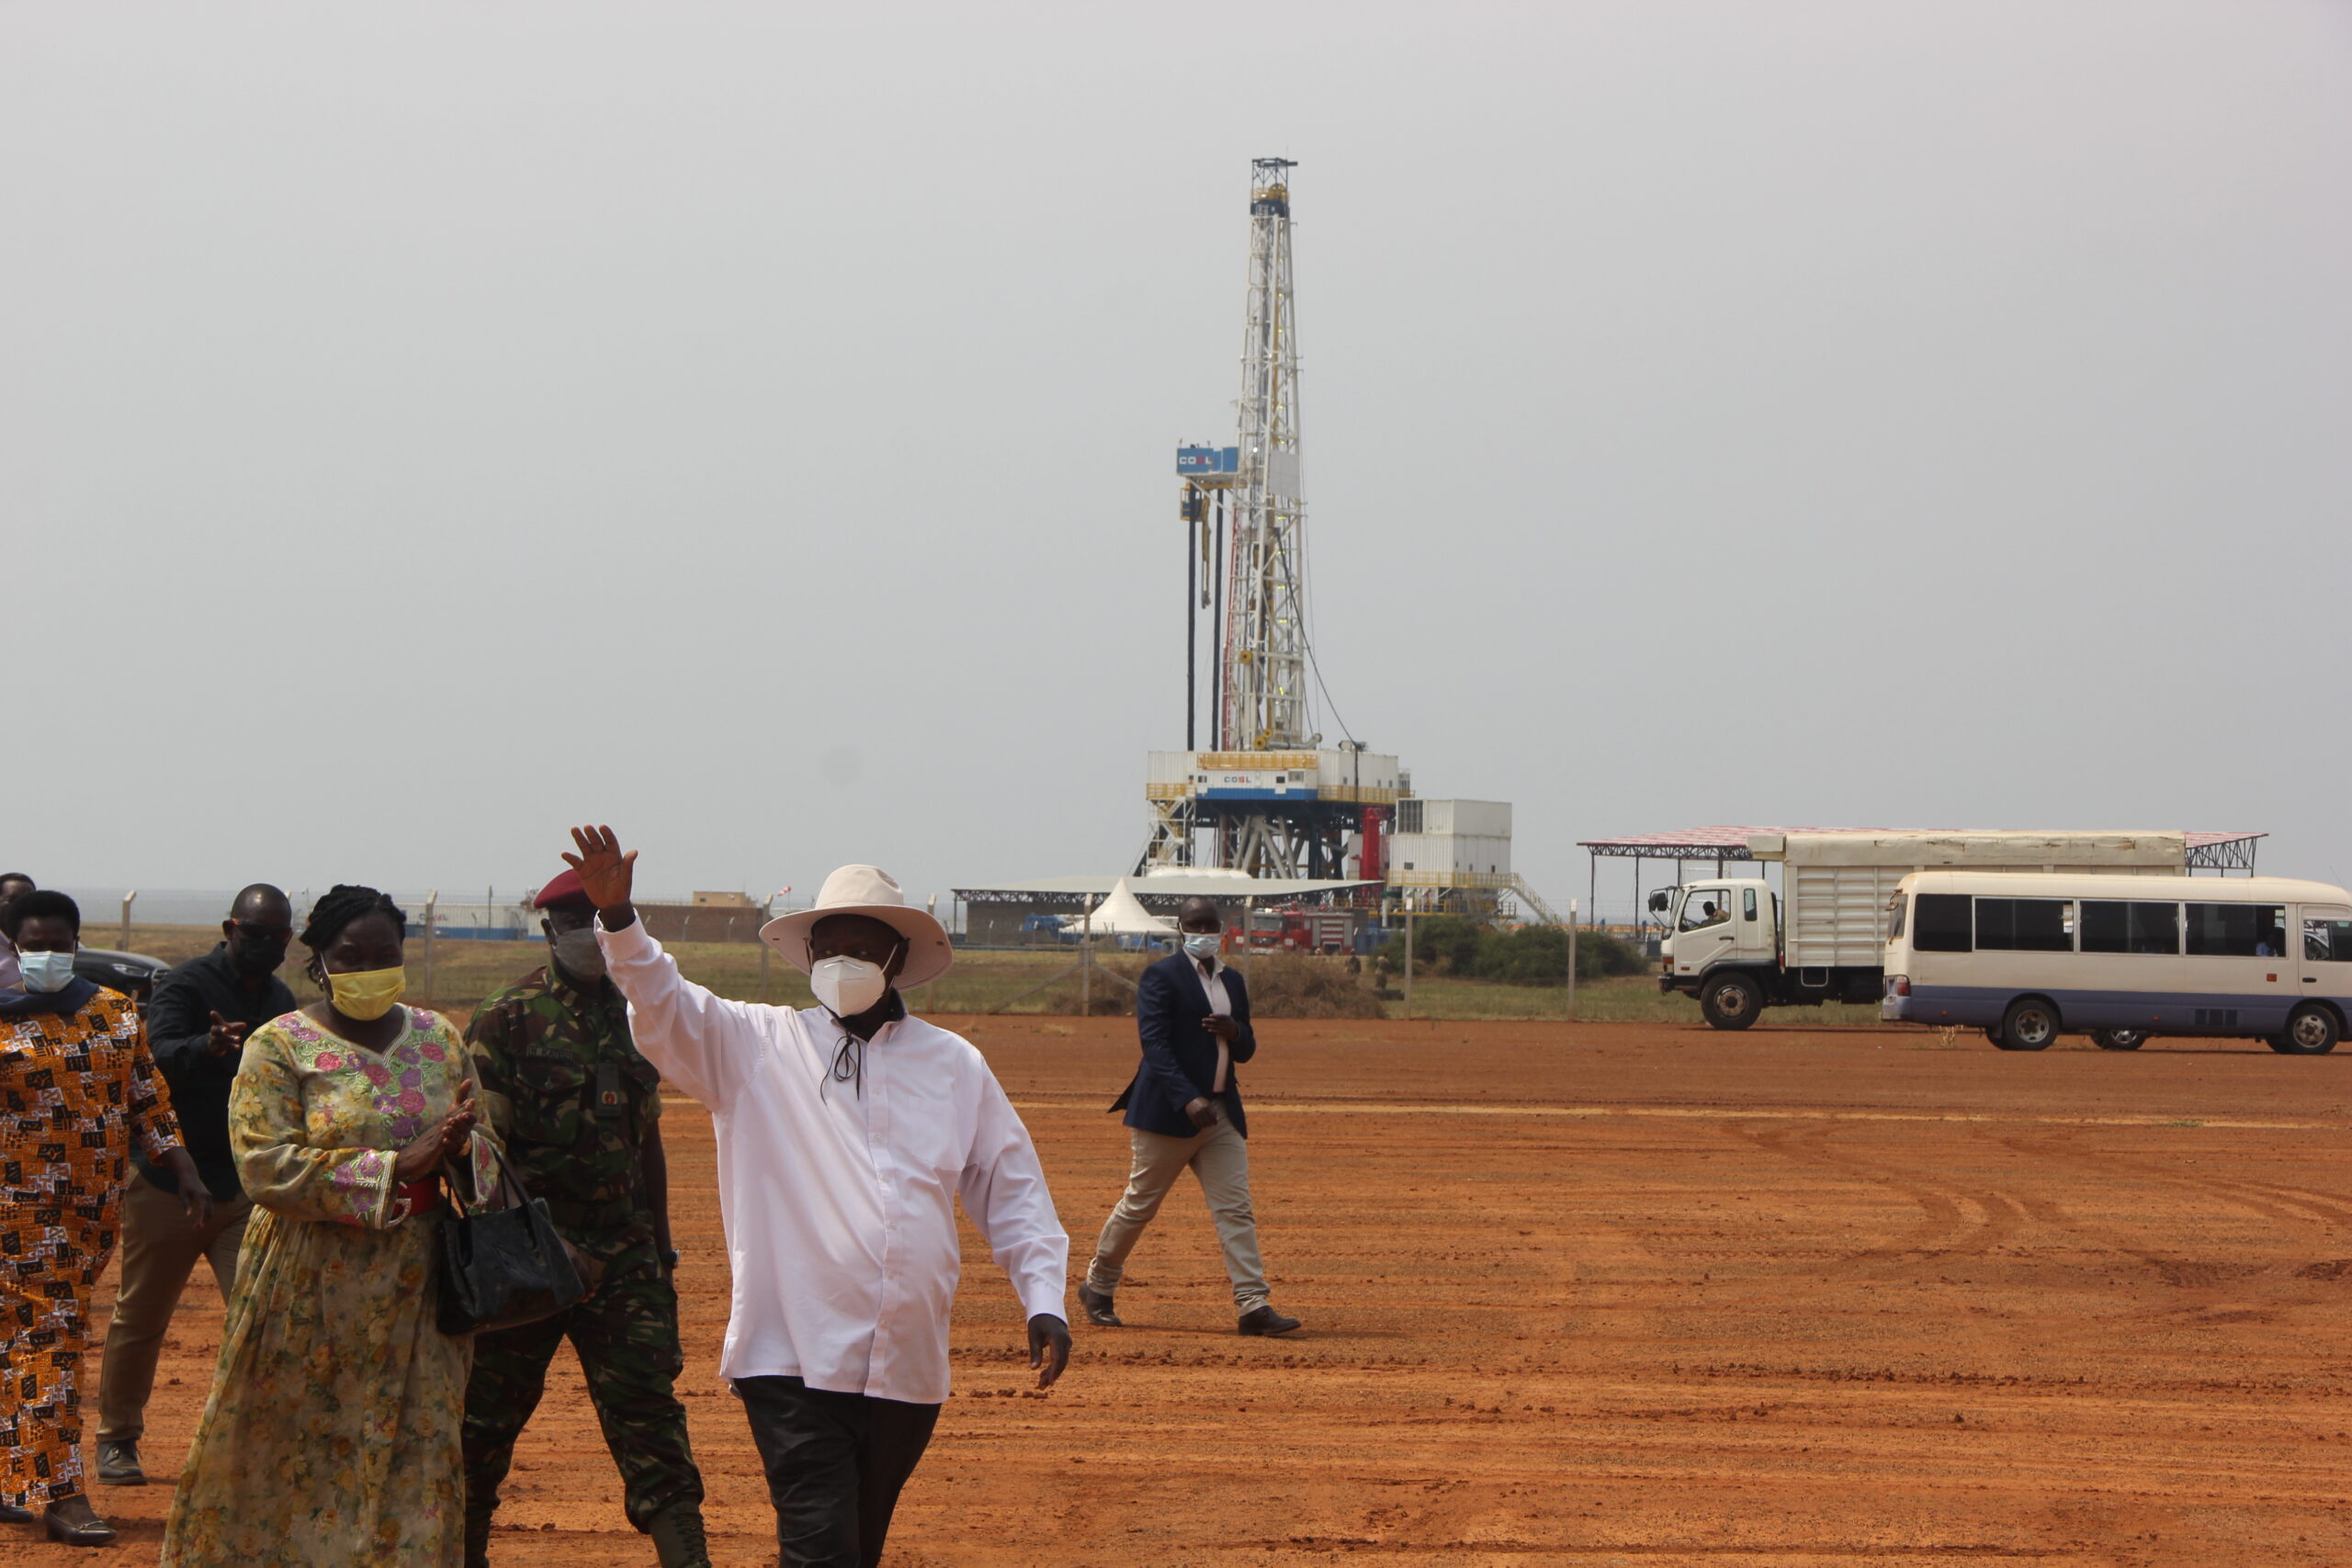 President Yoweri Museveni waves to guests during the launch of oil drilling at Kingfisher in Kikuube district in Western Uganda on January 24, 2023. Credit: Robert Atuhairwe/The Albertine Journal.